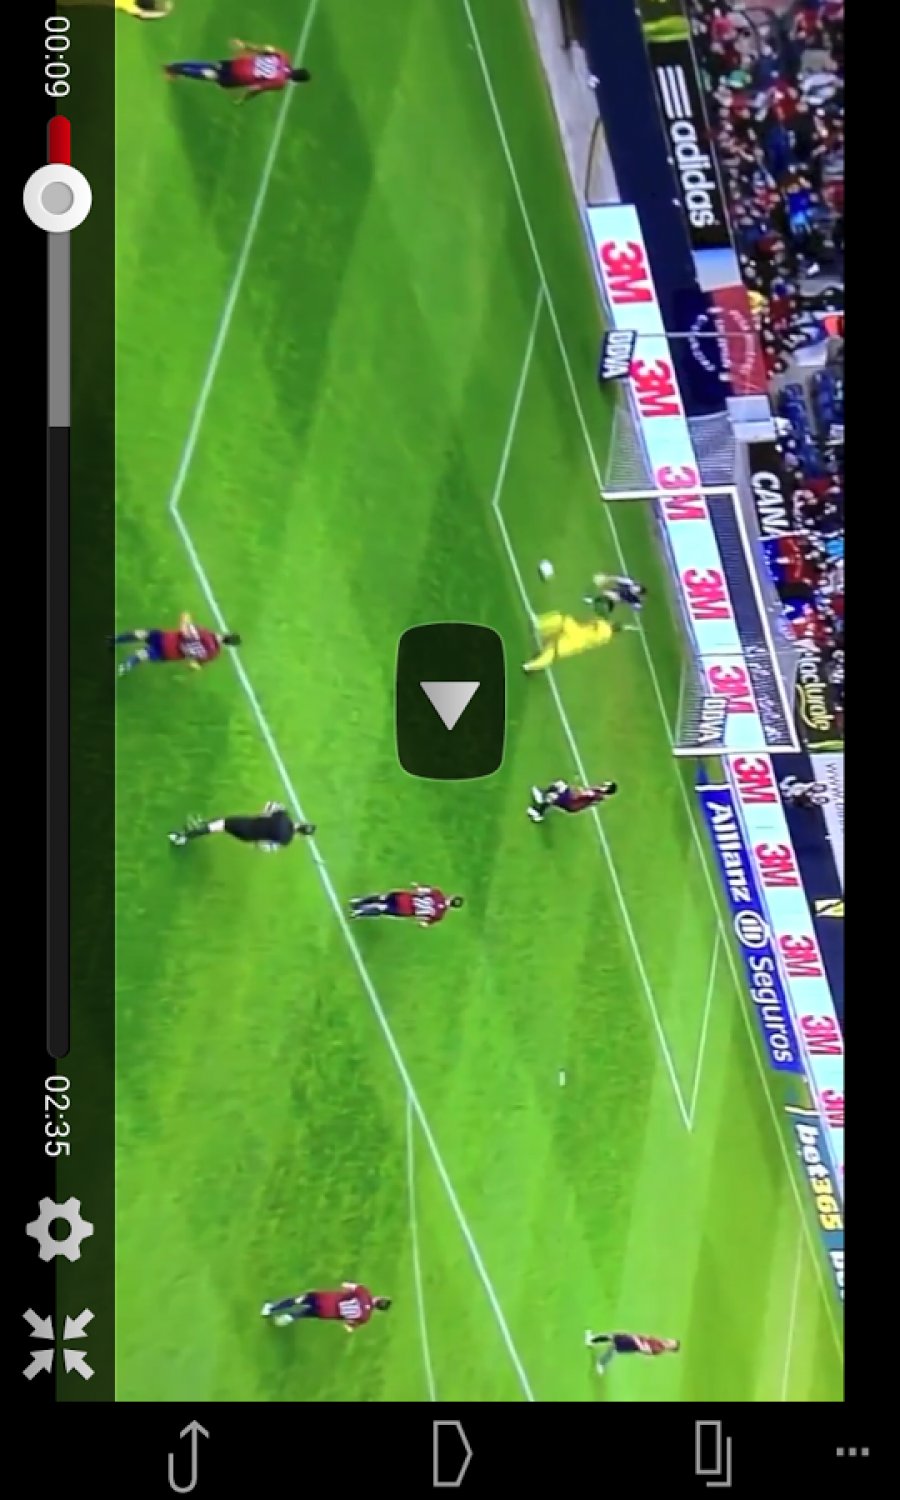 Football Livescores - GoalTone Android Game APK (goal.tone) by Play Together